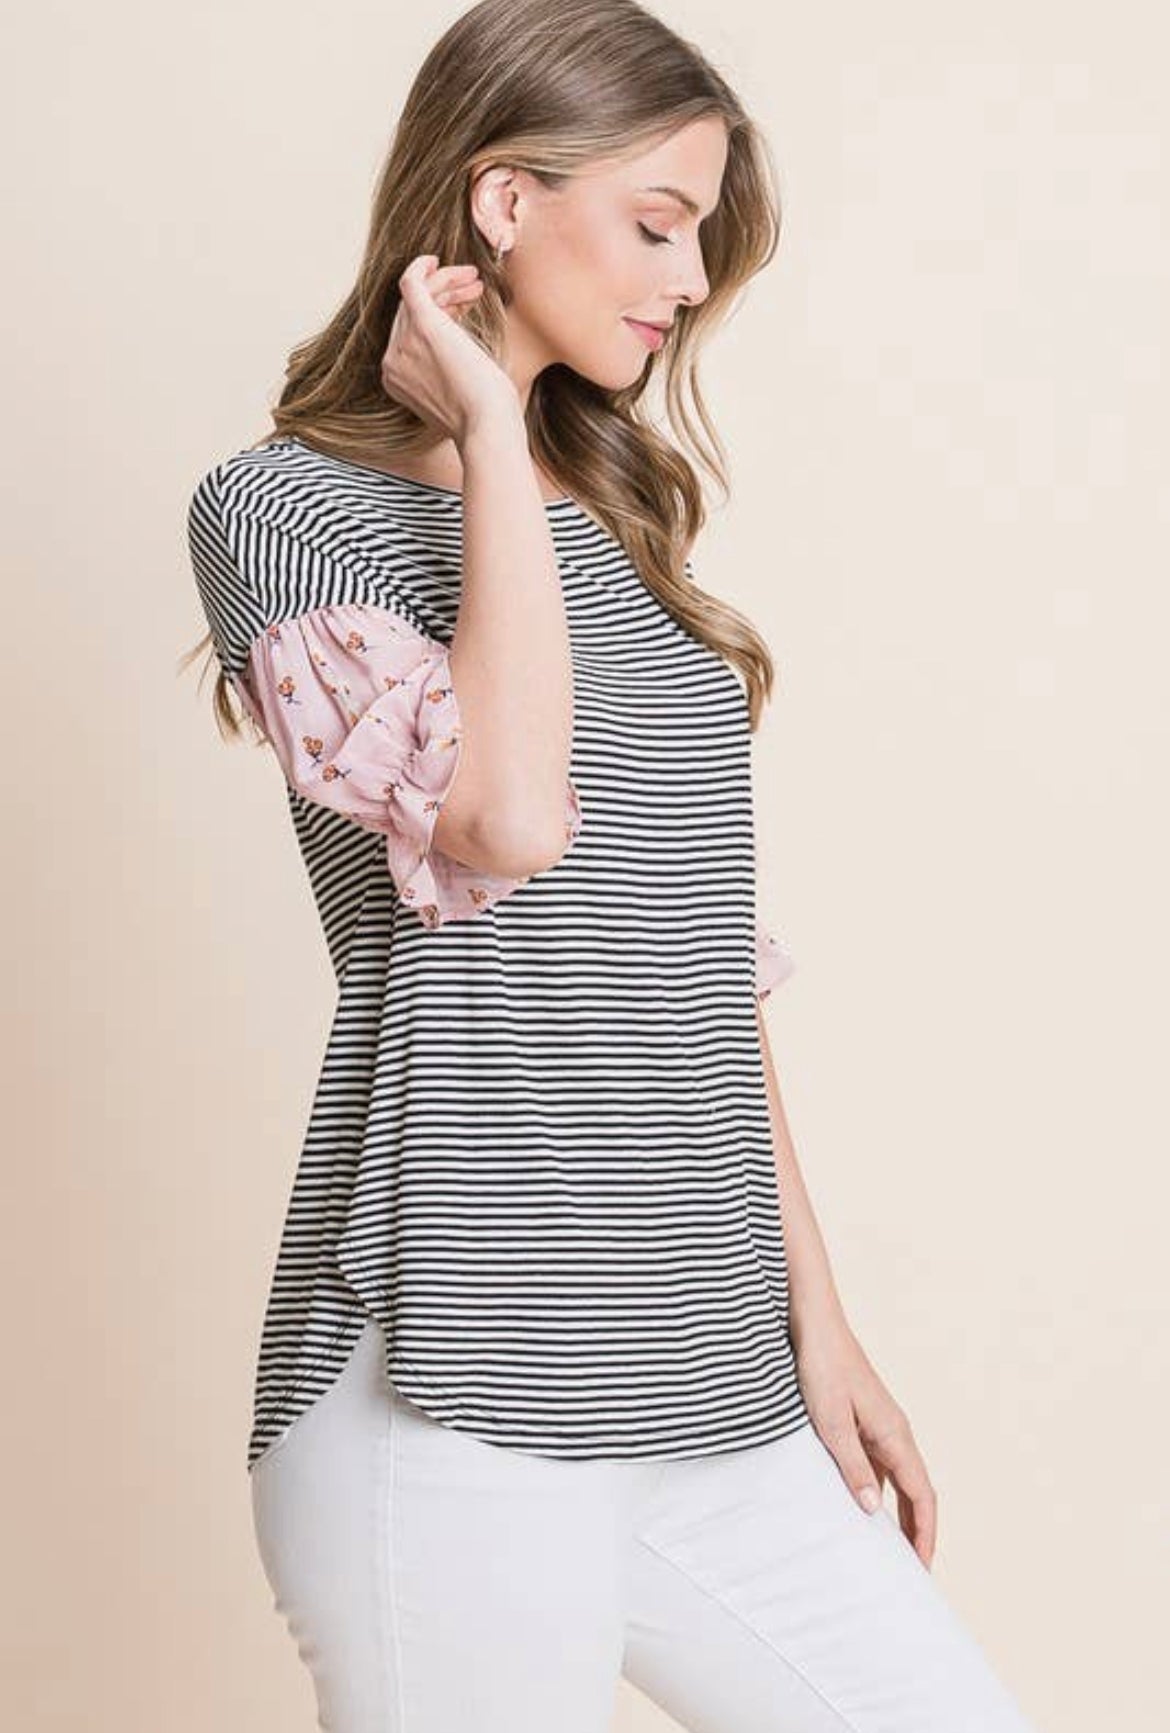 Flower Child Pink Floral Sleeve Top - Anchor Fusion Boutique